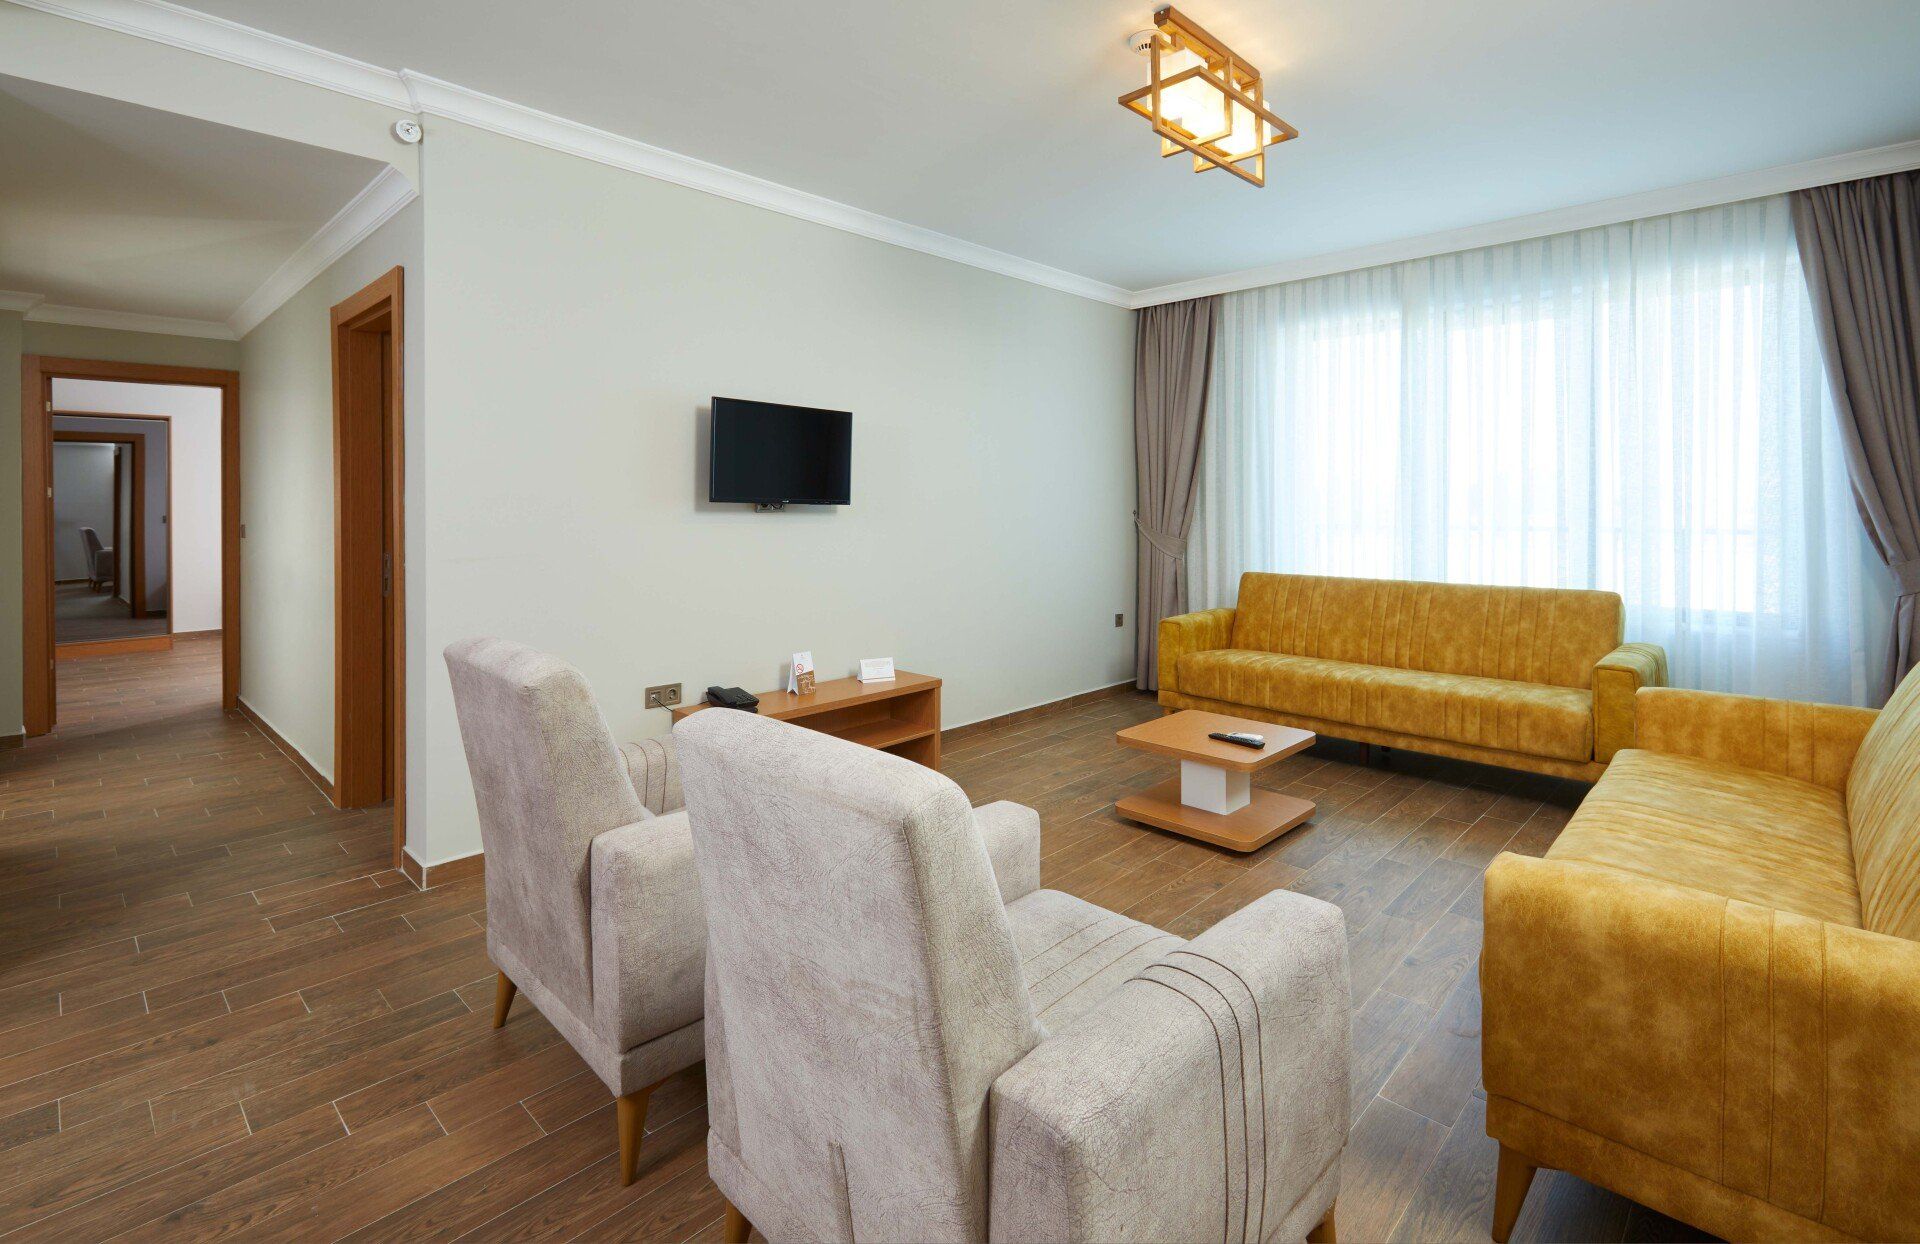 Hattuşa Vacation Thermal Club, Family Room